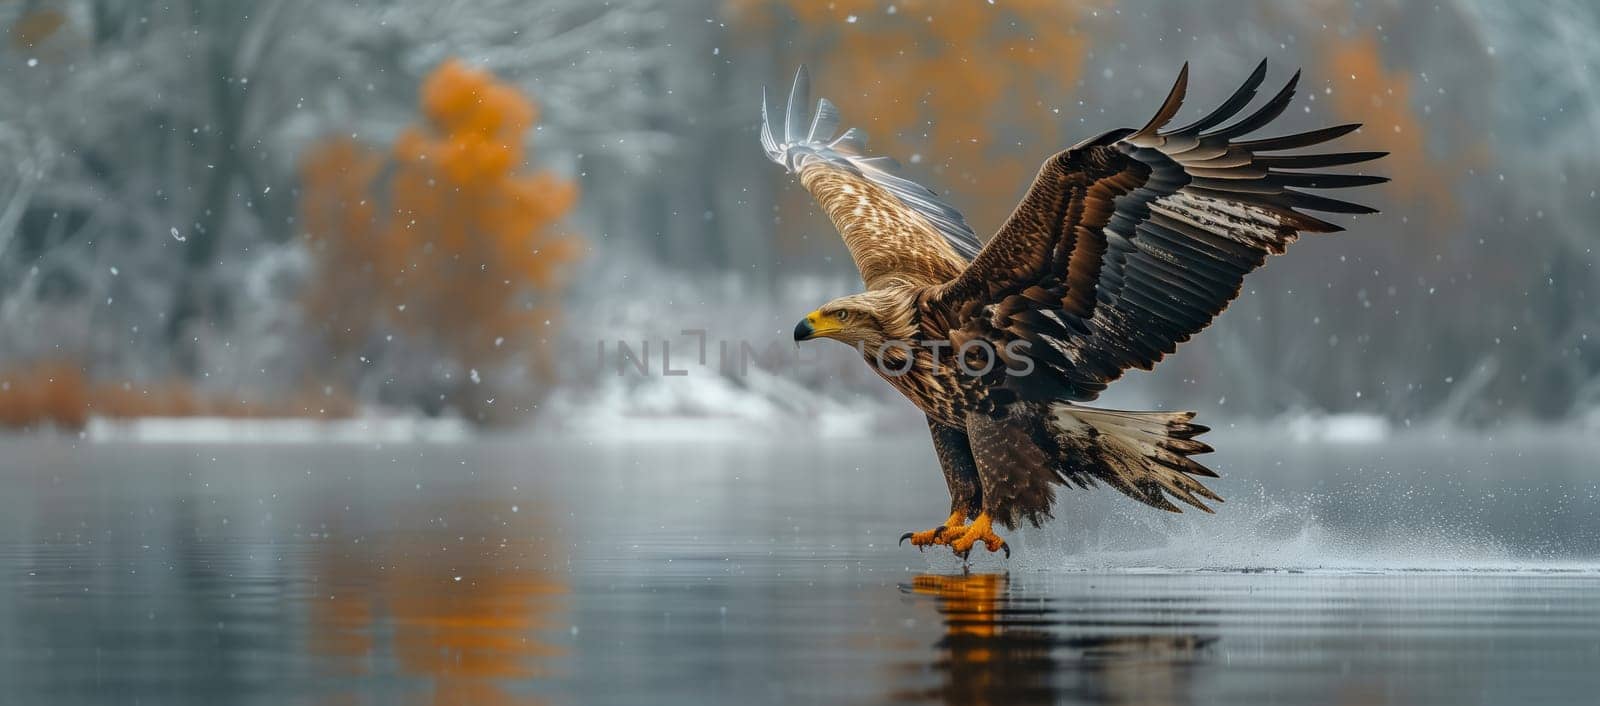 a bald eagle is flying over a body of water by richwolf